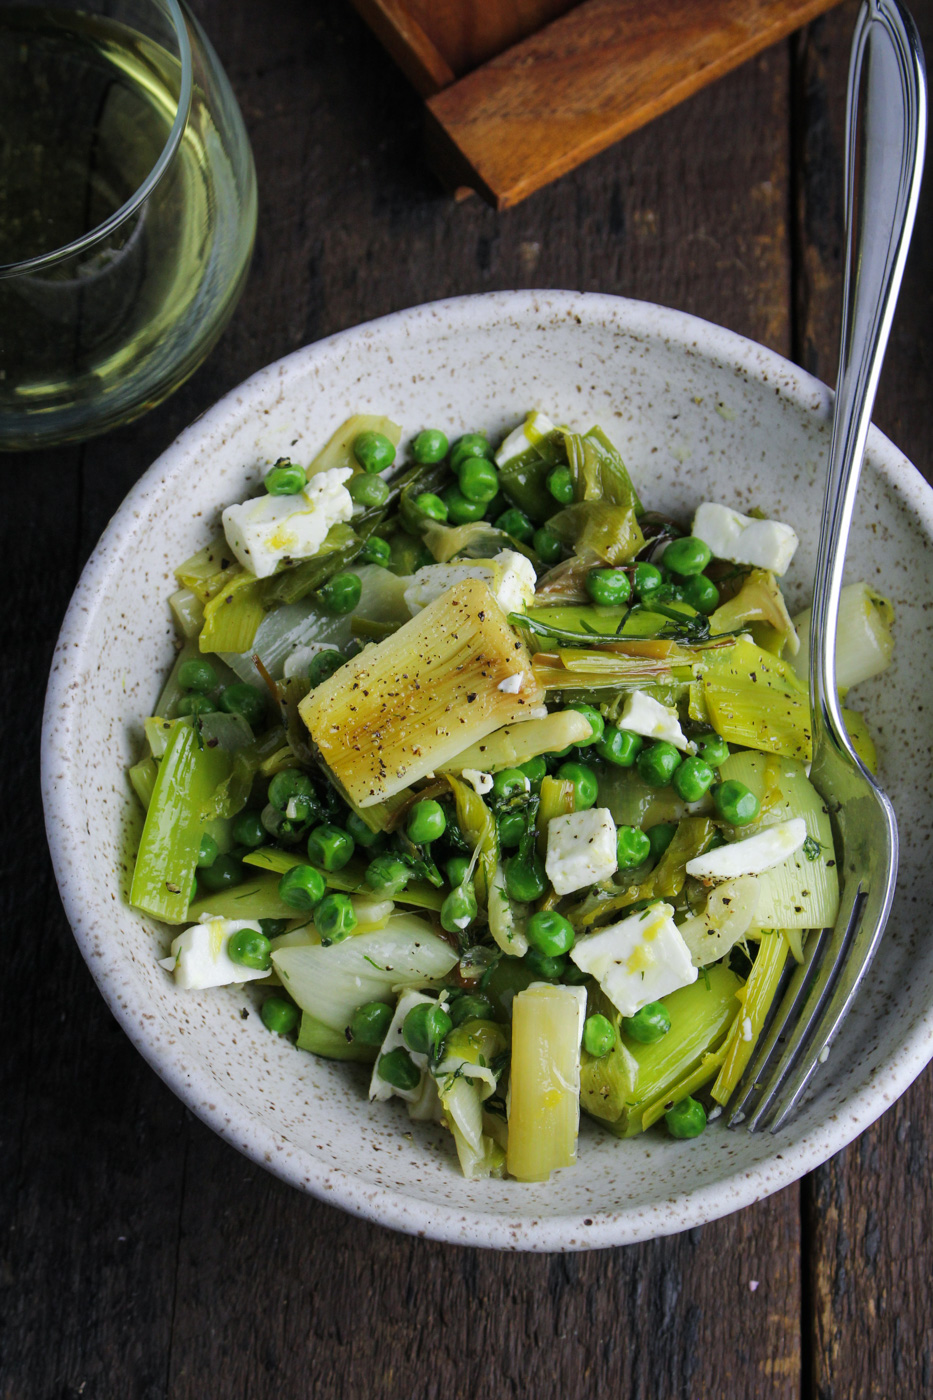 Olive-Oil Braised Leeks and Peas with Feta and Dill - Sunday Dinner: Easter Edition {Katie at the Kitchen Door}